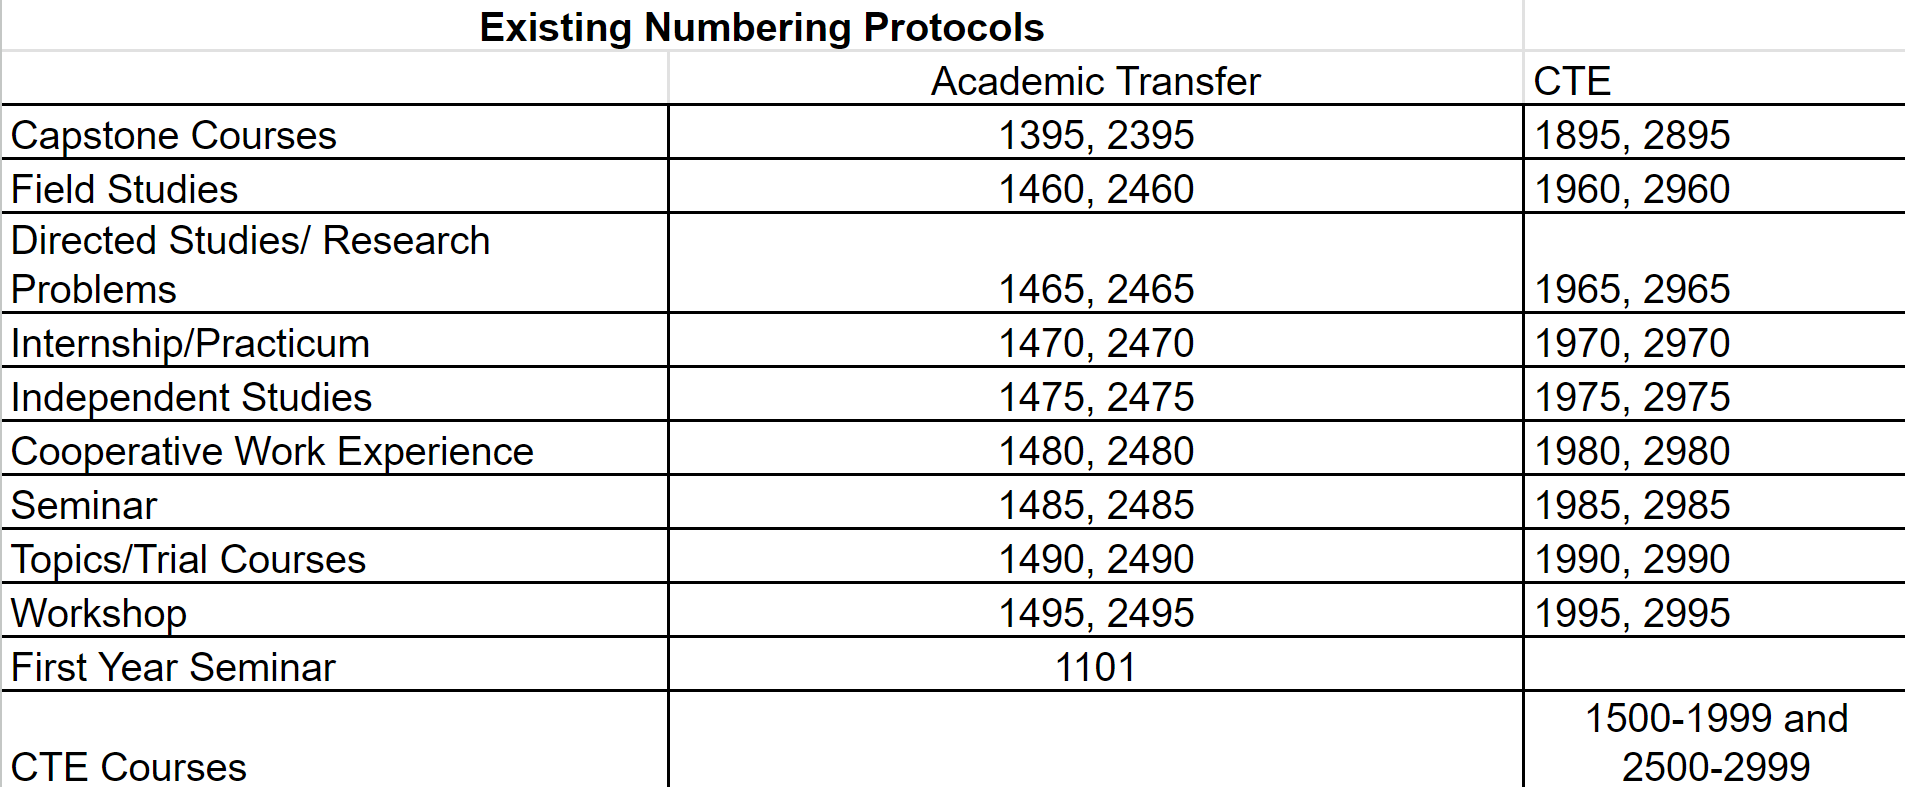 existing number protocol